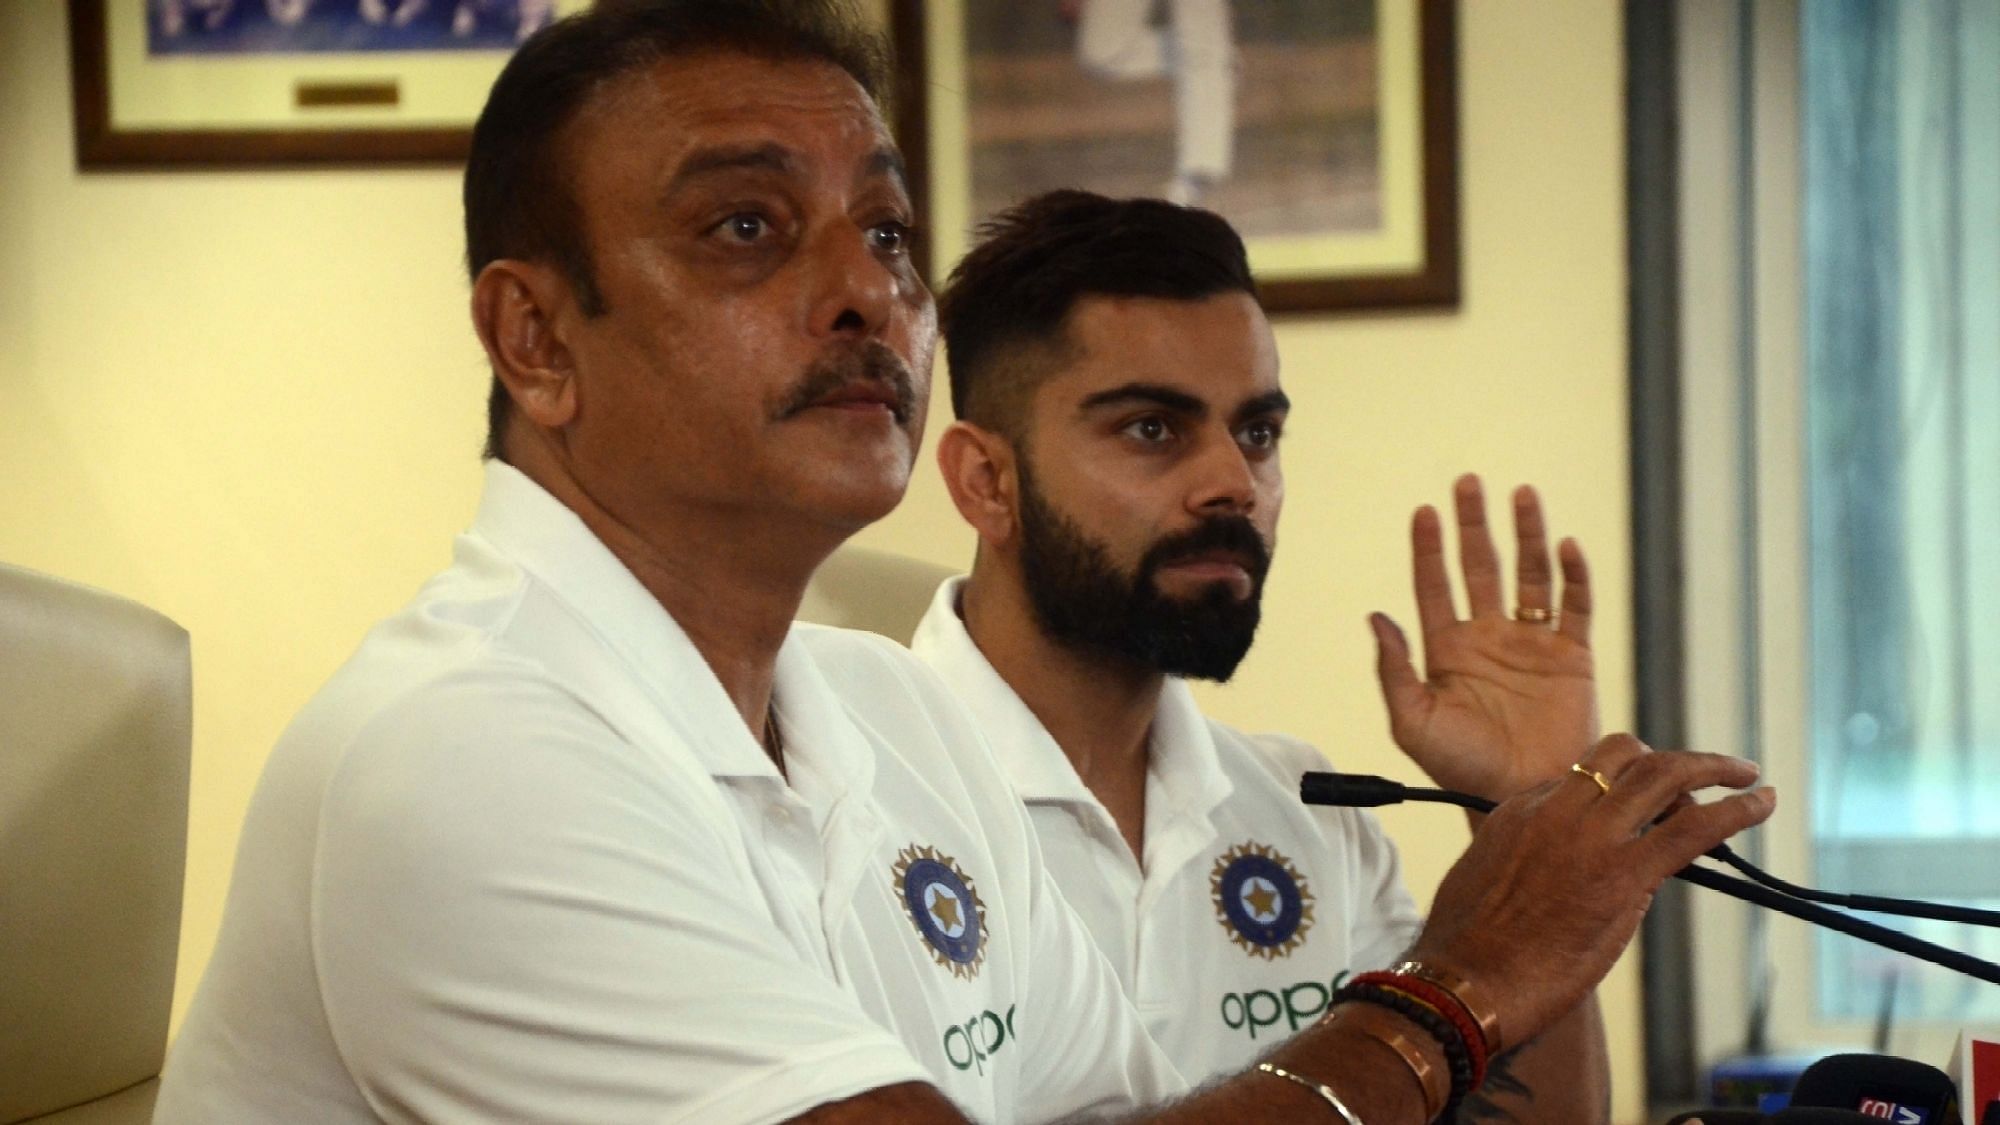 Indian cricket team’s head coach Ravi Shastri and skipper Virat Kohli address a press conference ahead of leaving for England to participate in the ICC Cricket World Cup 2019 on 21 May.